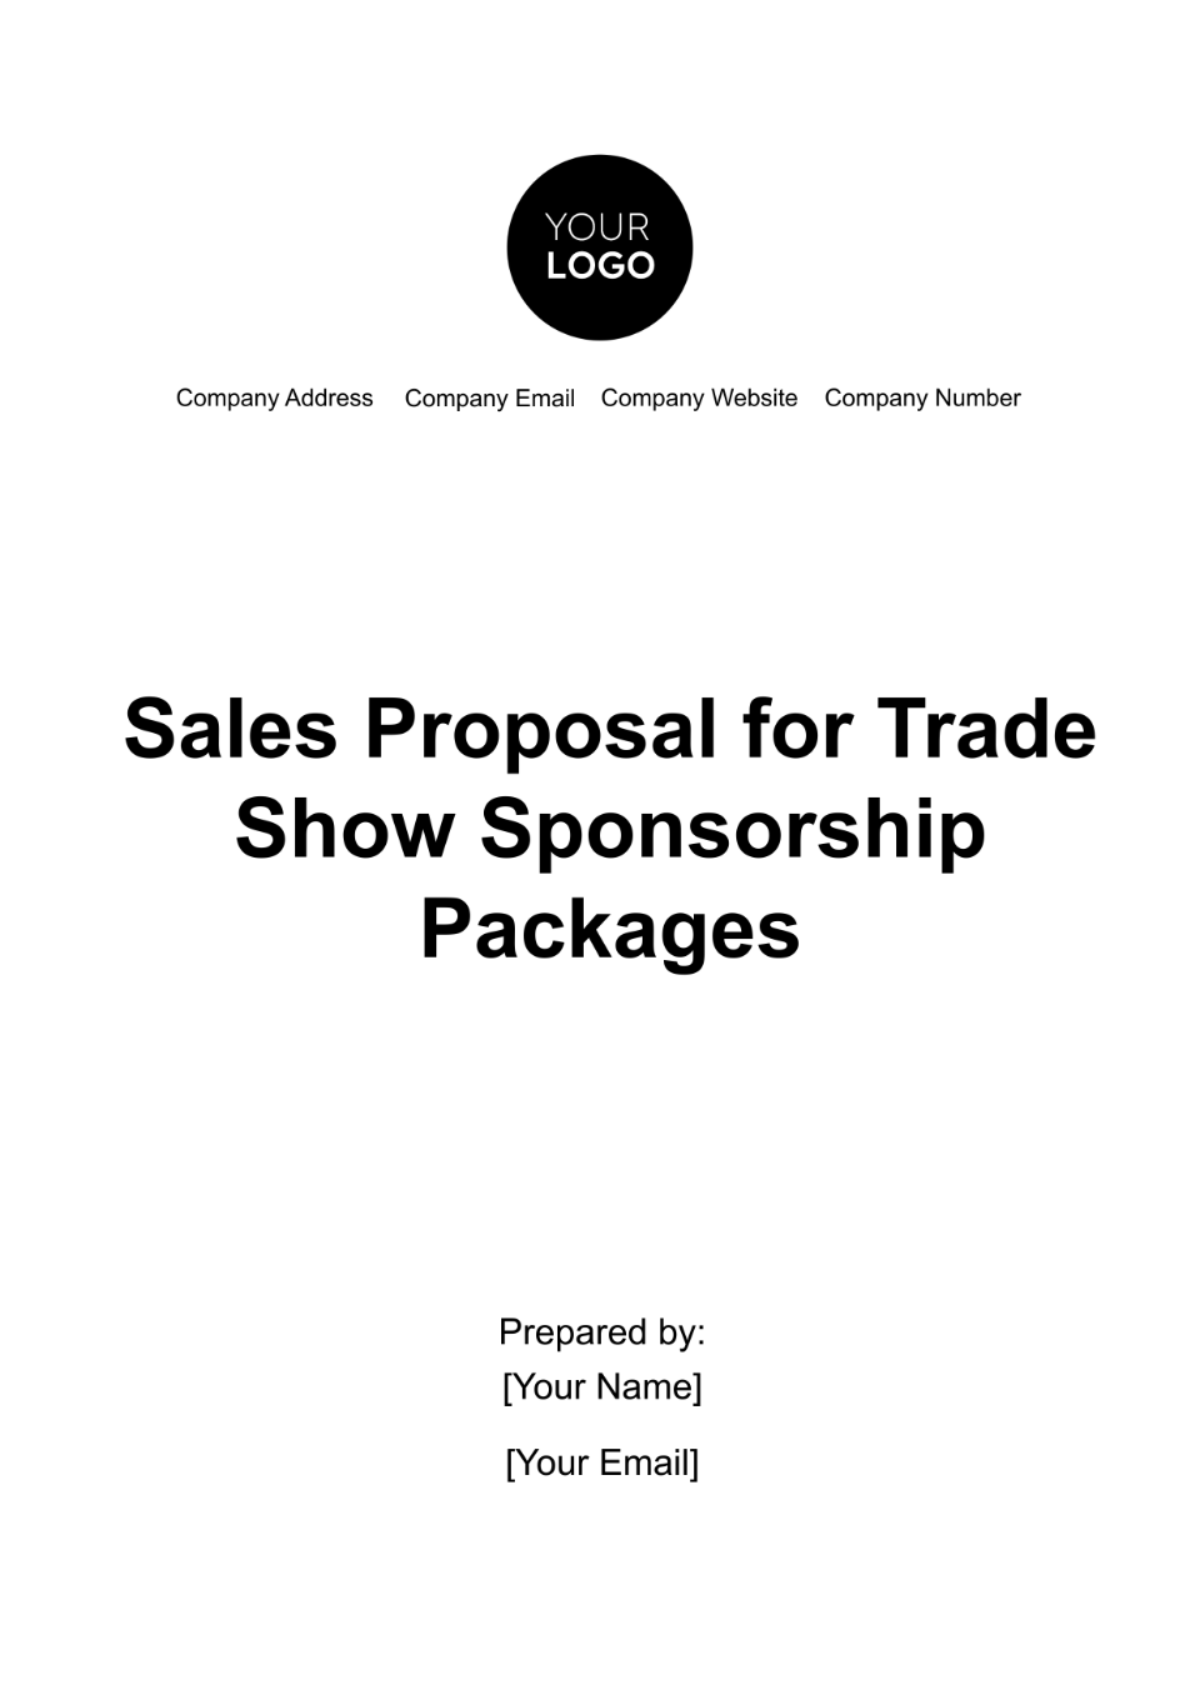 Sales Proposal for Trade Show Sponsorship Packages Template